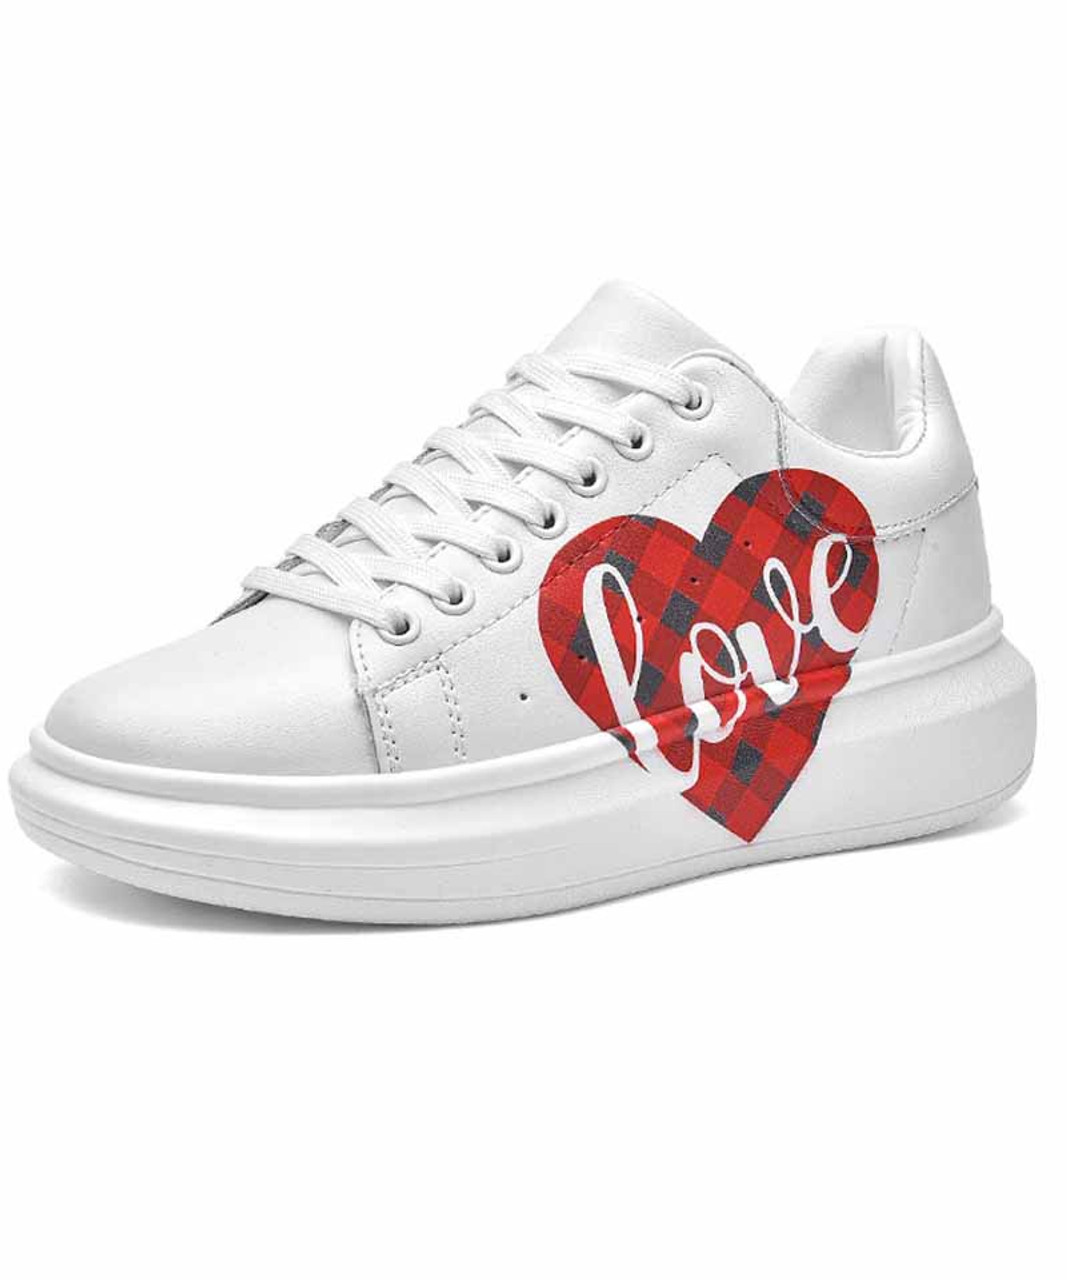 check heart love pattern up sneaker | Womens sneakers shoes online 2519WS